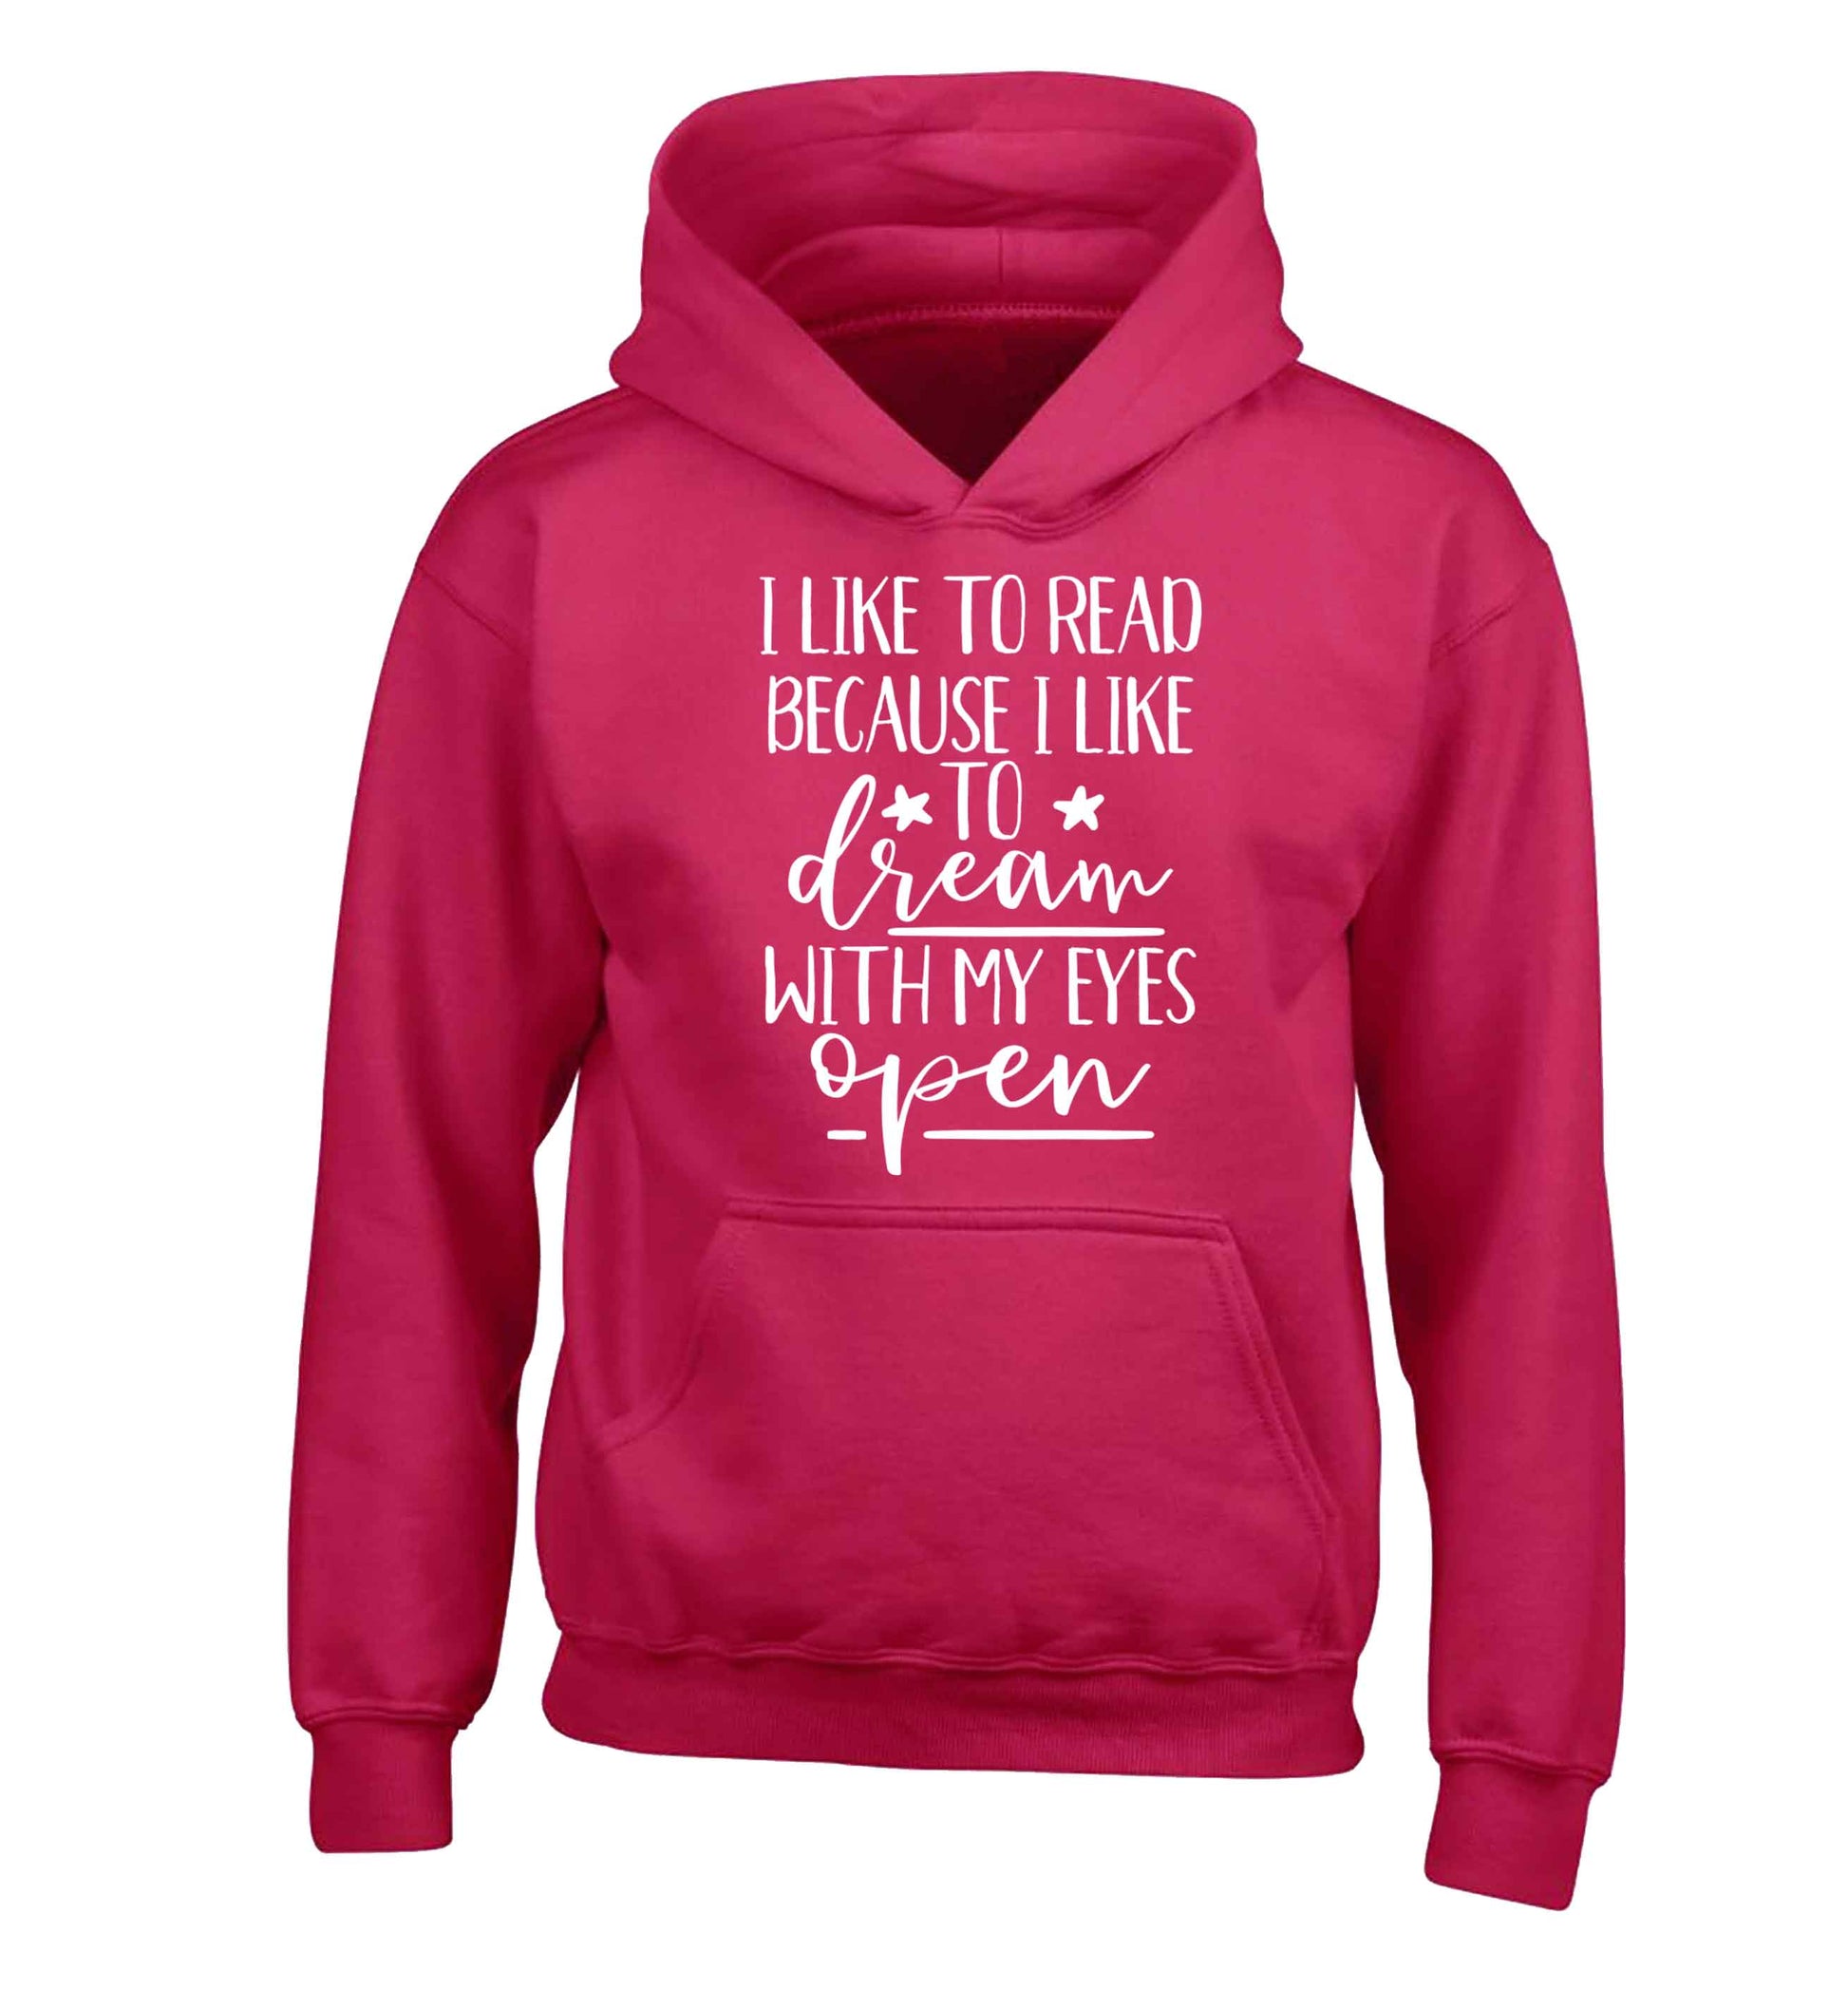 I like to read because I like to dream with my eyes open children's pink hoodie 12-13 Years